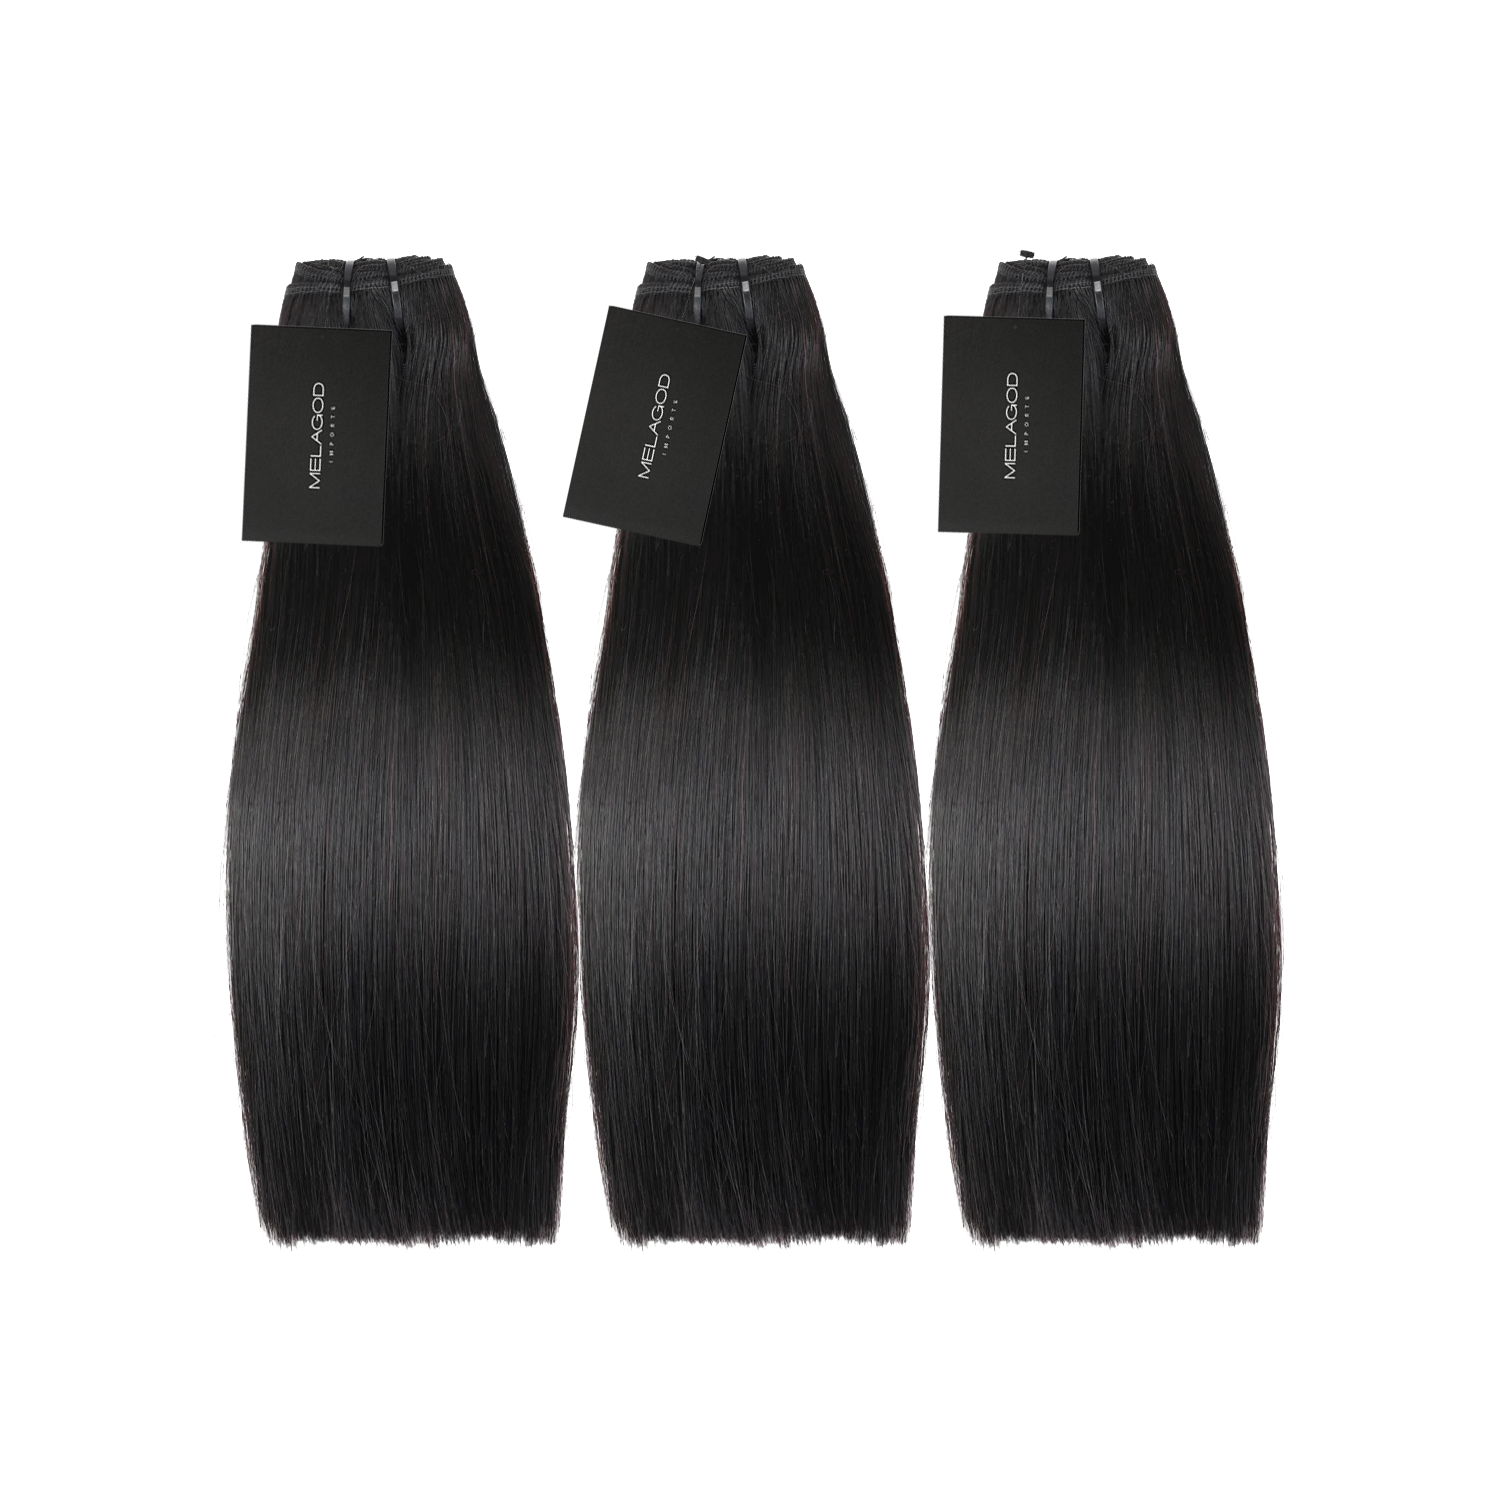 MelaGod Imports If you are looking for a stunning, natural looking and effortless hairstyle, you can’t go wrong with our Premium Straight Hair Collection. Key Features:   Thick & Full Hair Extensions: Luxuriate in the richness of these thick voluminous hair bundles, providing a natural finish, and pairs perfectly with natural or relaxed hair.